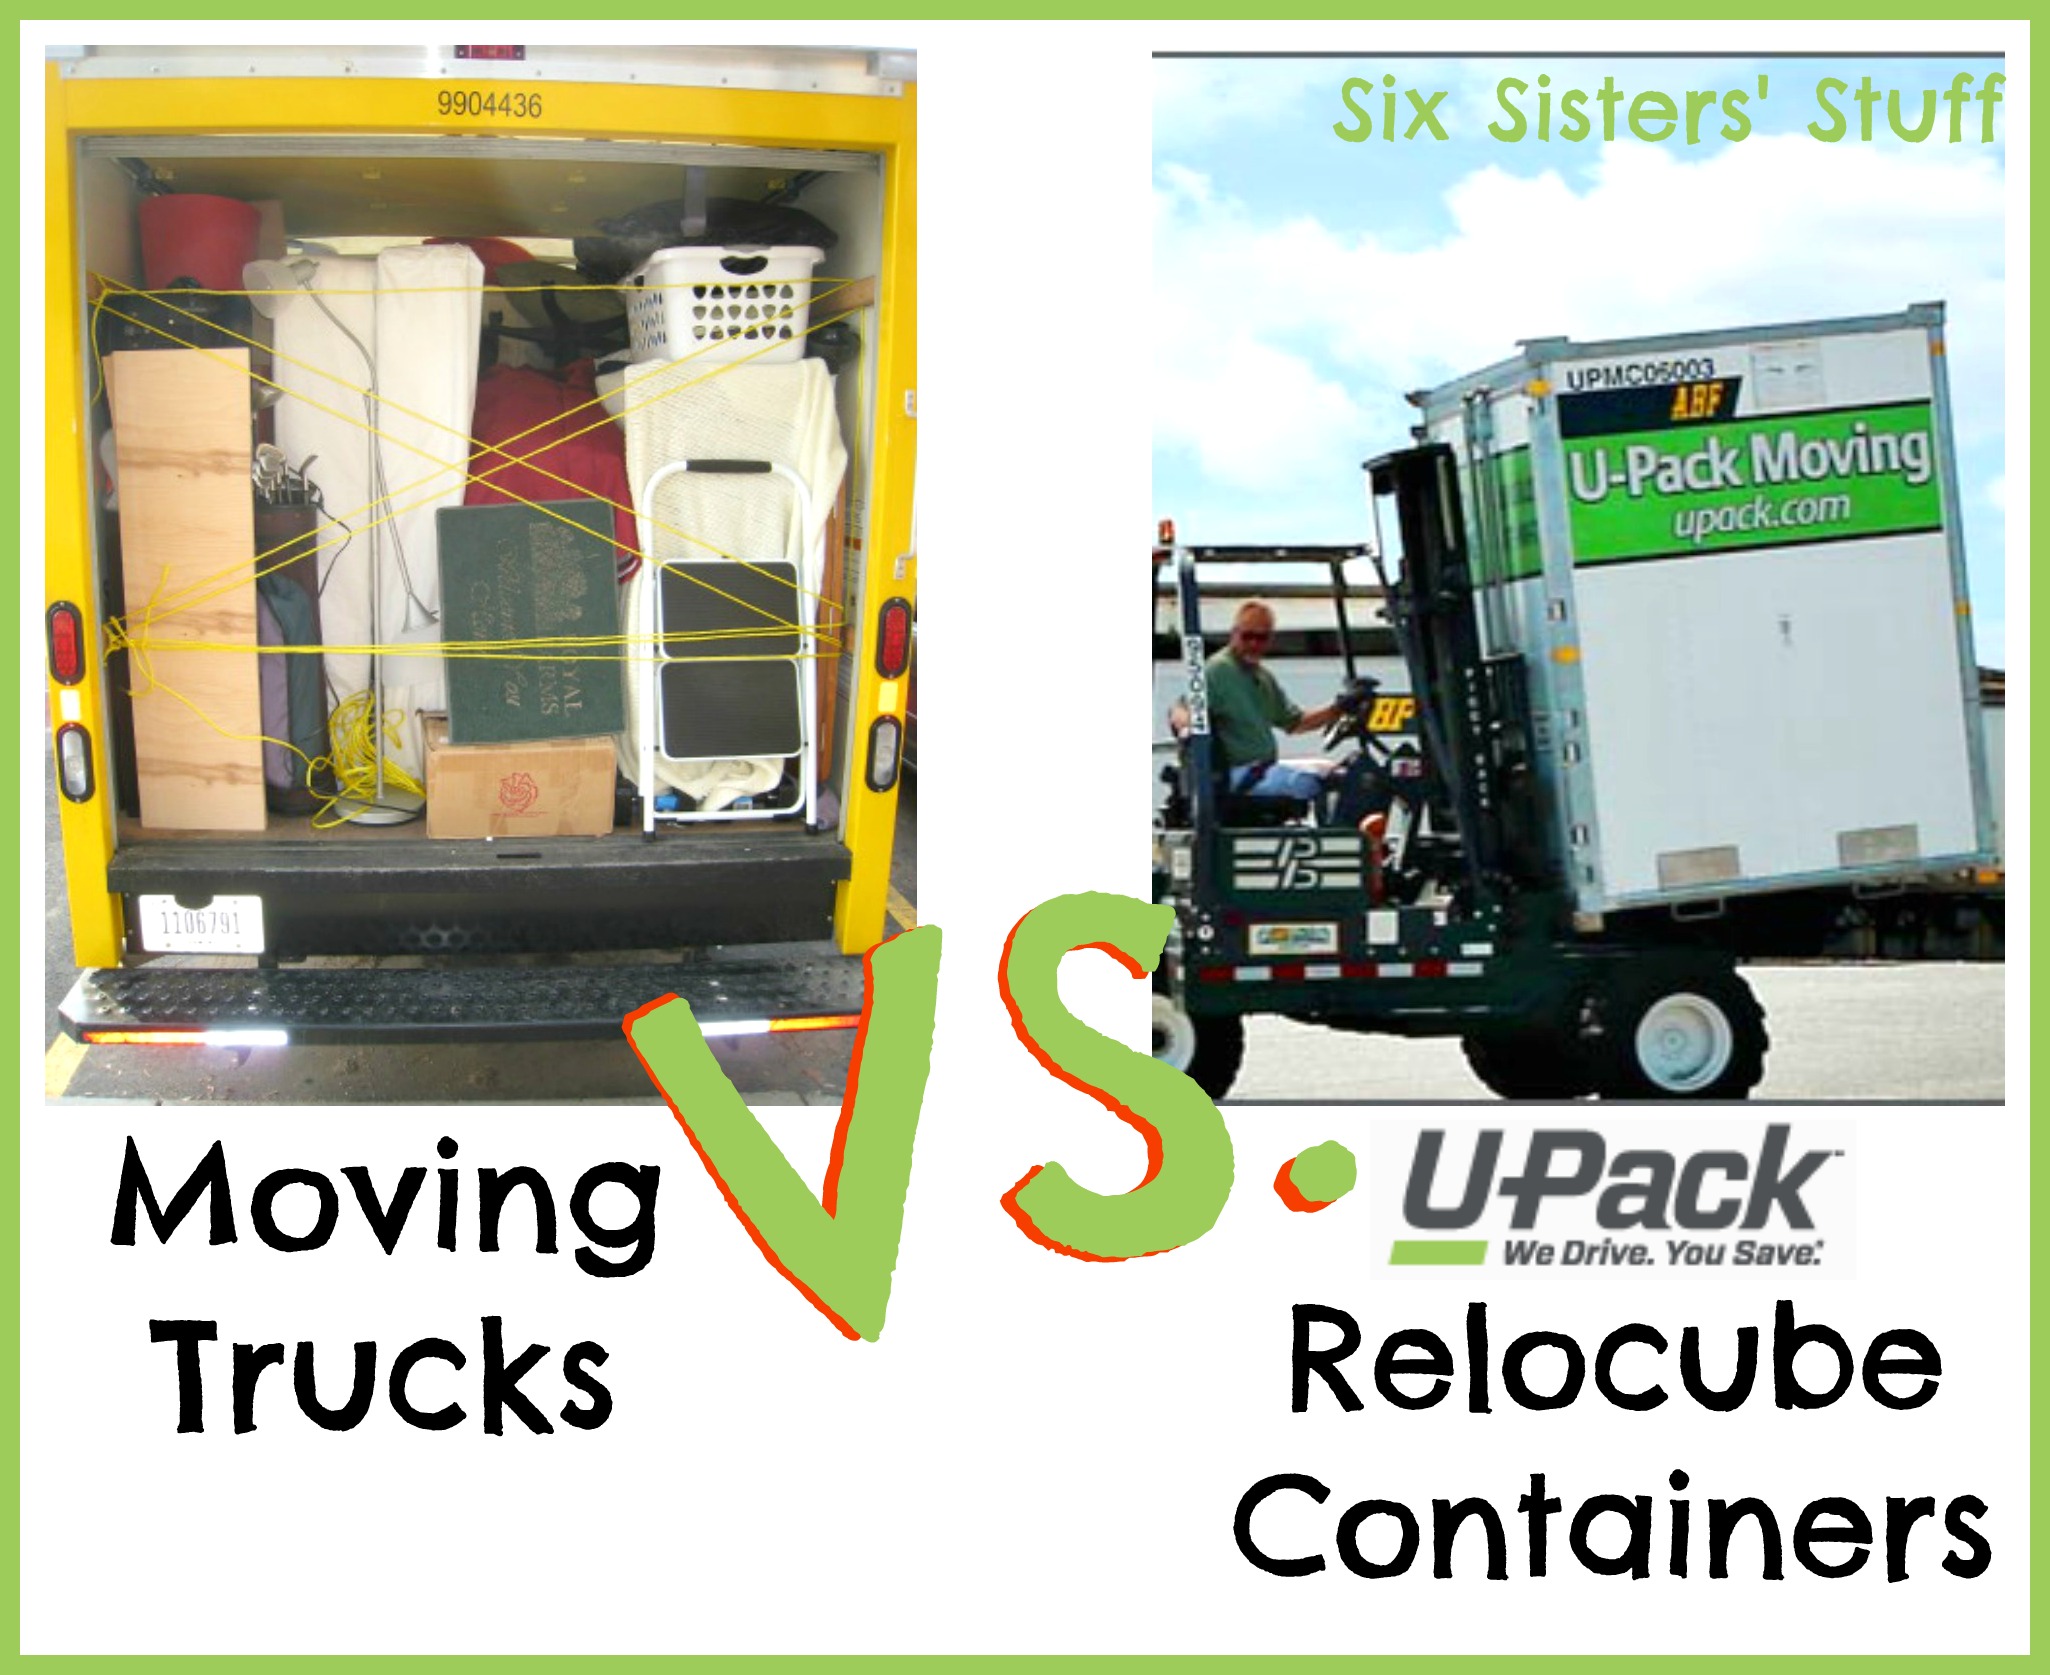 Moving Trucks Vs. U-Pack Relocube Containers